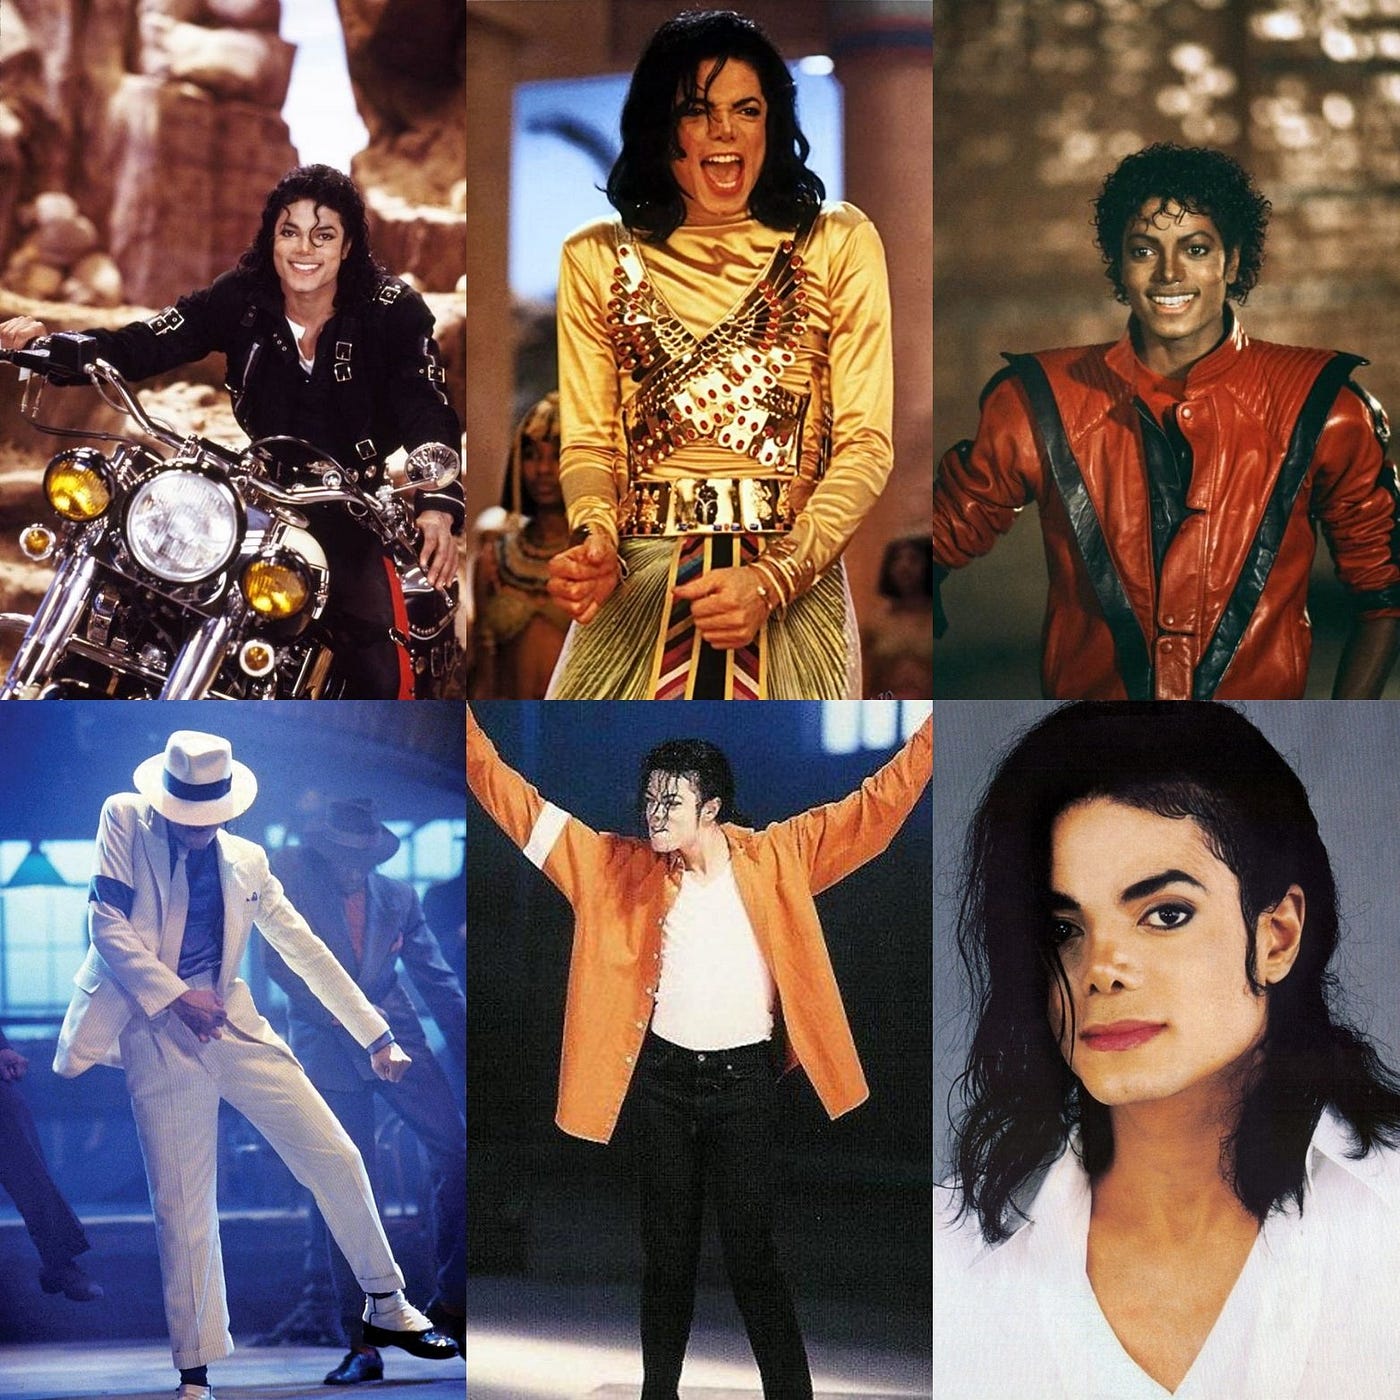 Michael Jackson Wasn't Only The King of Pop — He Was The King of Fashion, by Alexis